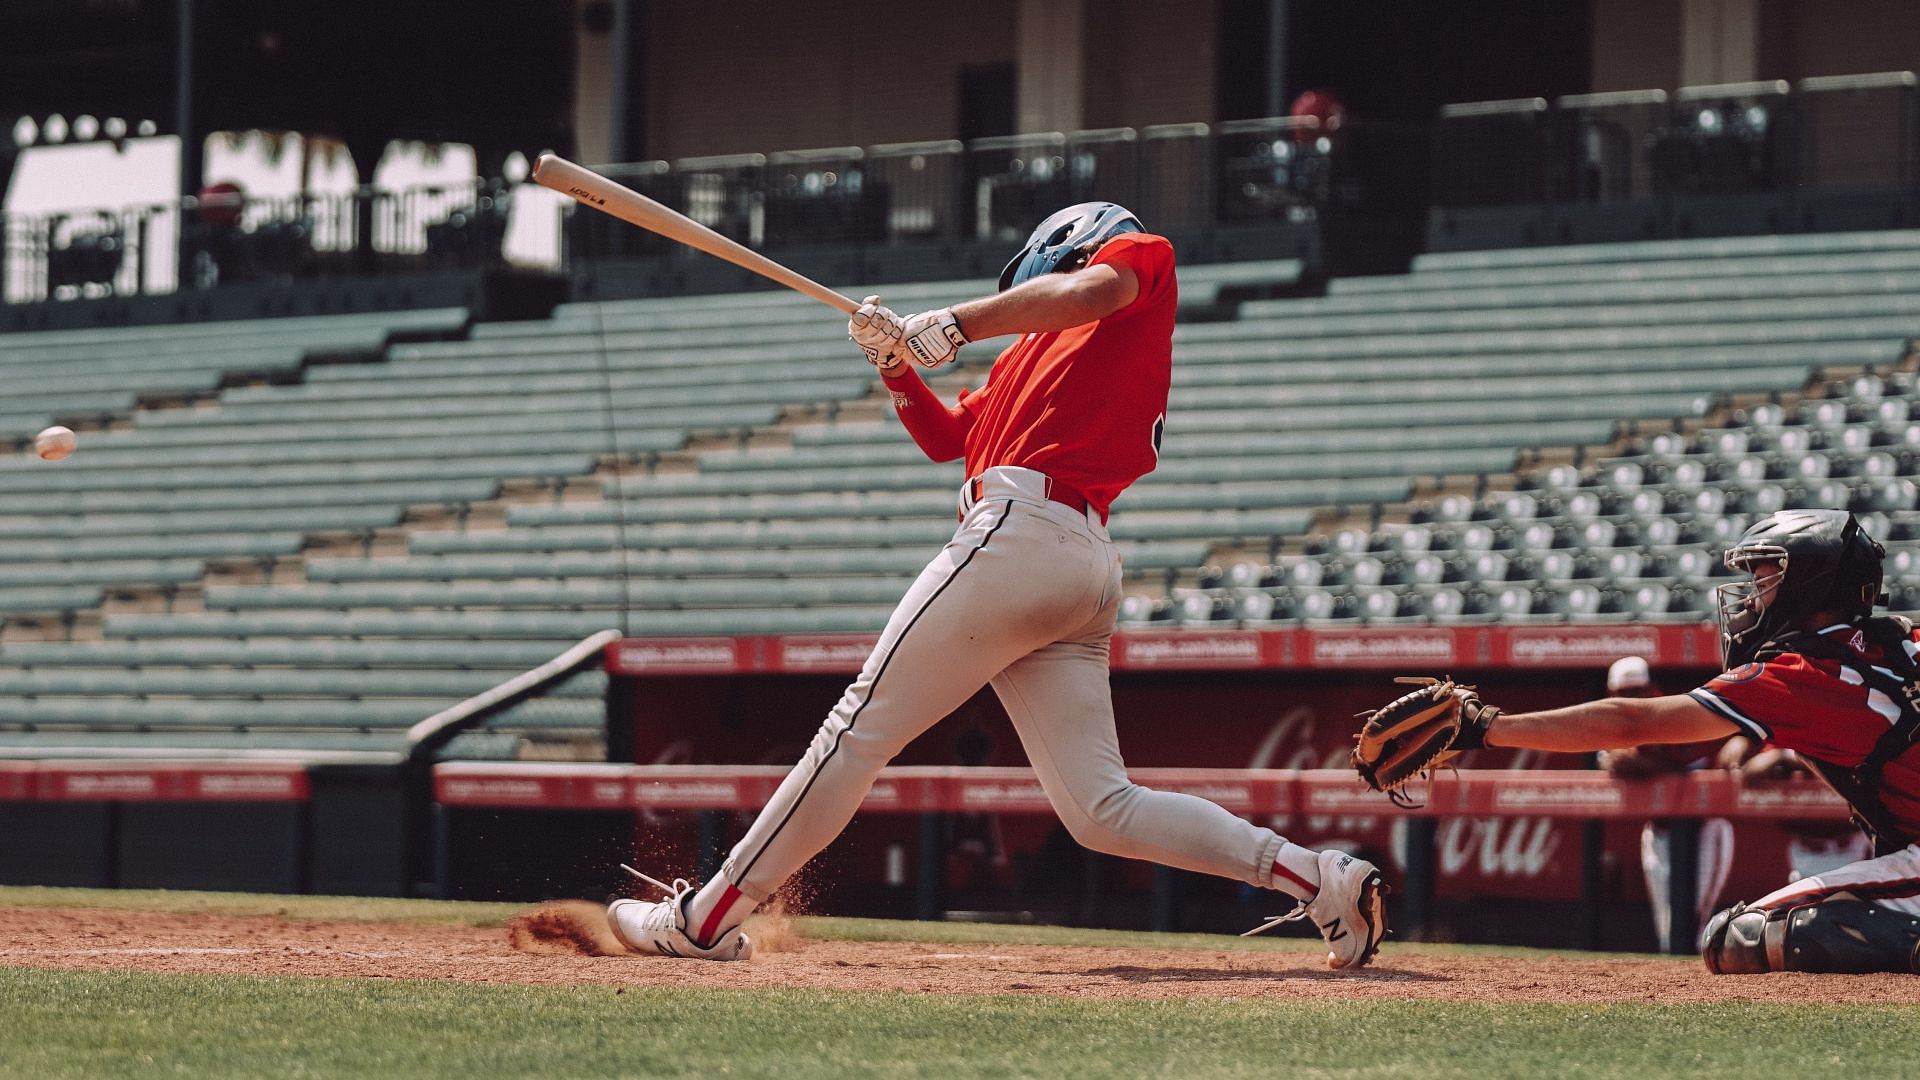 Functional exercises can help strengthen muscles for baseball players. (Image via Unsplash / Josh Hemsley)